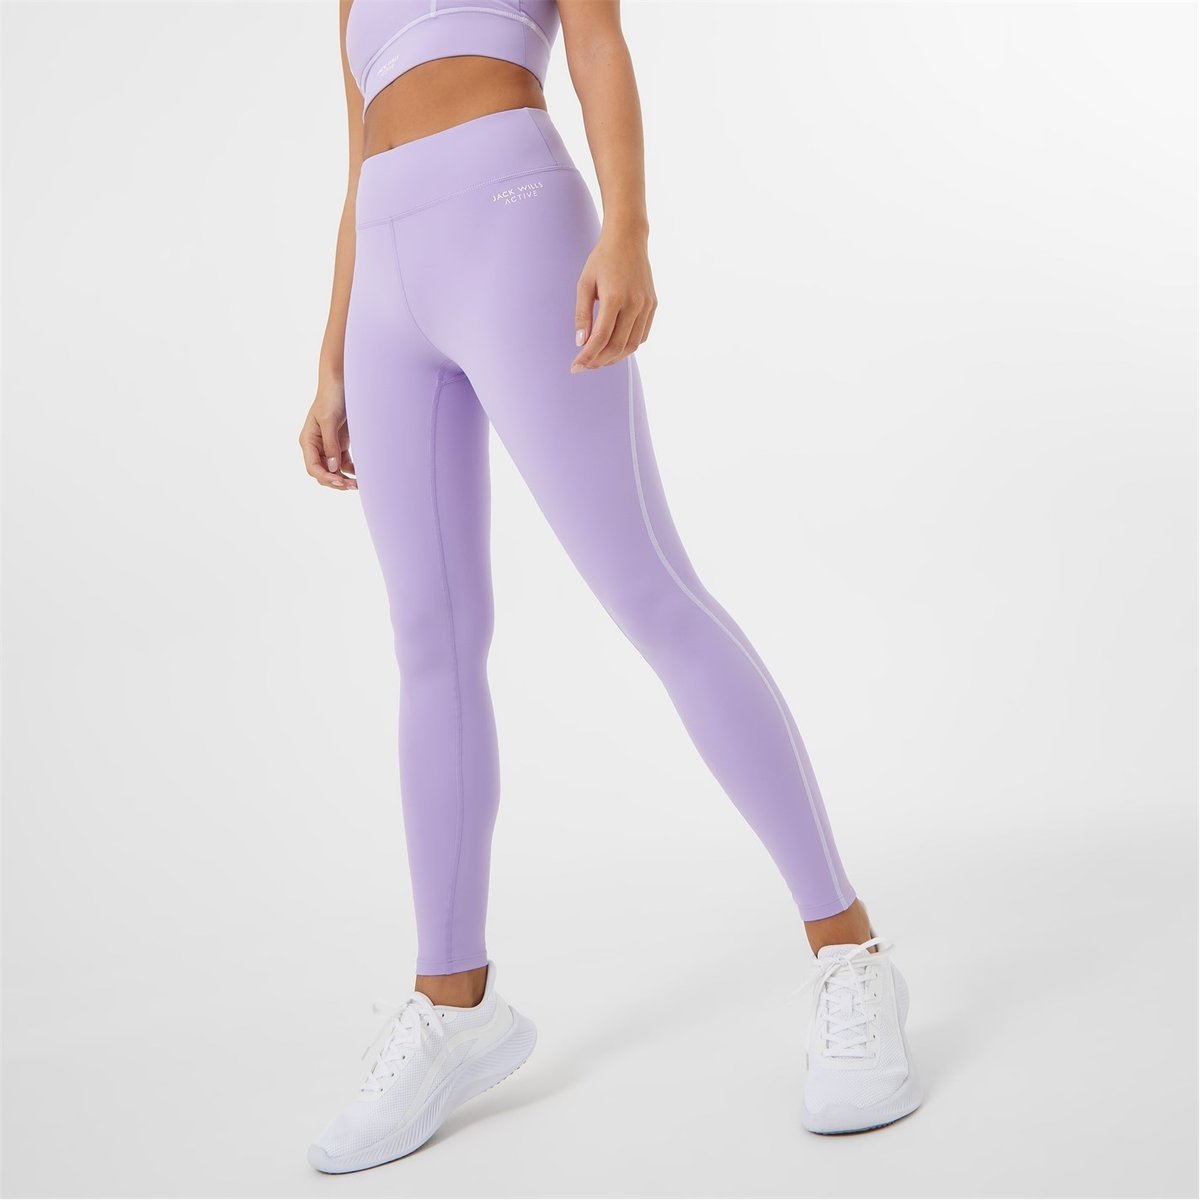 Jack Wills Active Piped Leggings